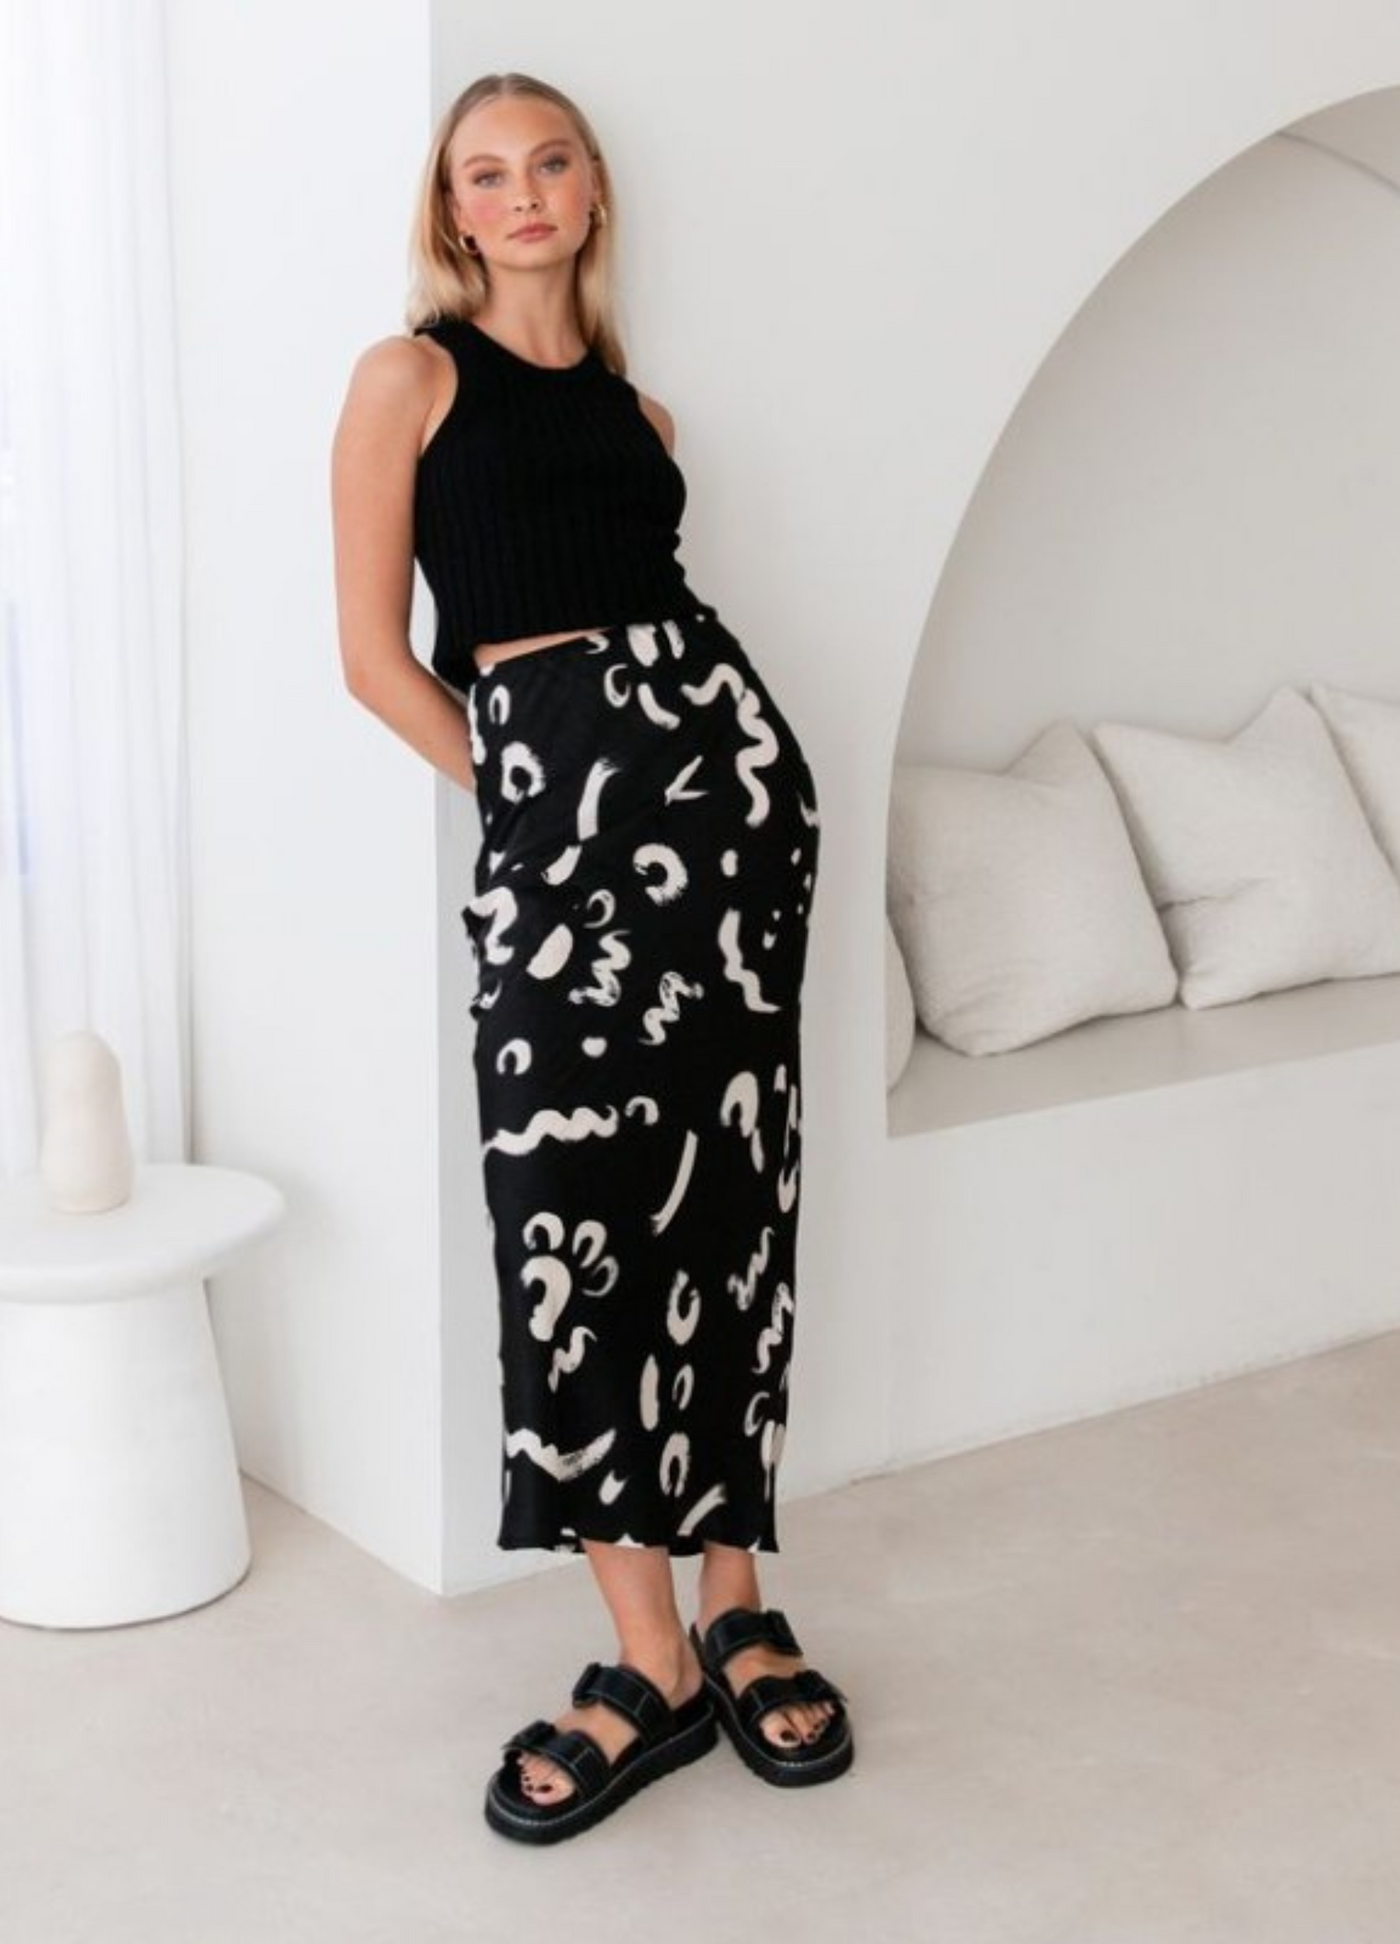 Model wearing the Kyria Skirt from Paper Heart in black and white print